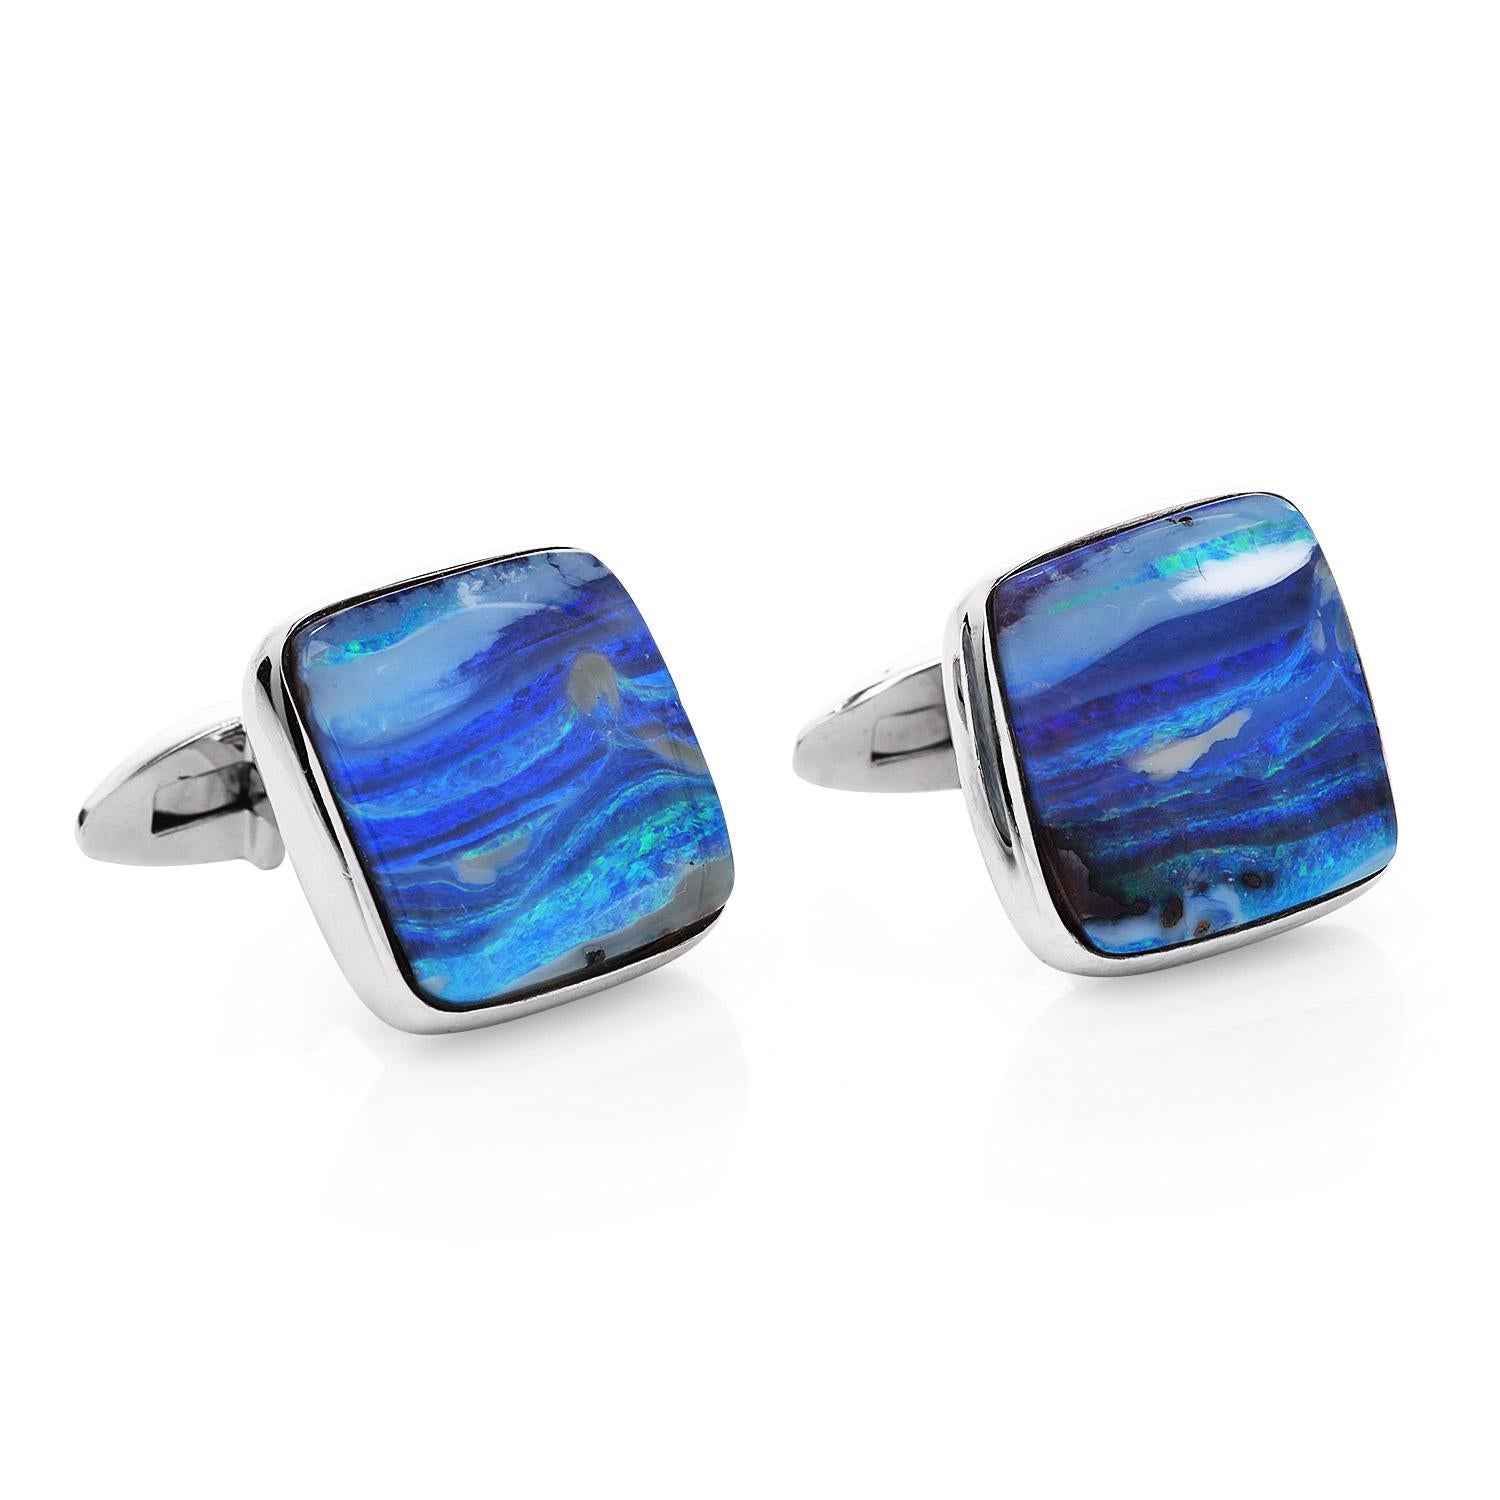 Bring the look of the sea to every occasion.

These blue opal cufflinks are crafted in solid platinum with 14K white gold backs.

They weigh 17.3 grams and measure 17 mm x 16 mm. Showcasing a pair of cabochon cushion square cut, blue opals, weighing